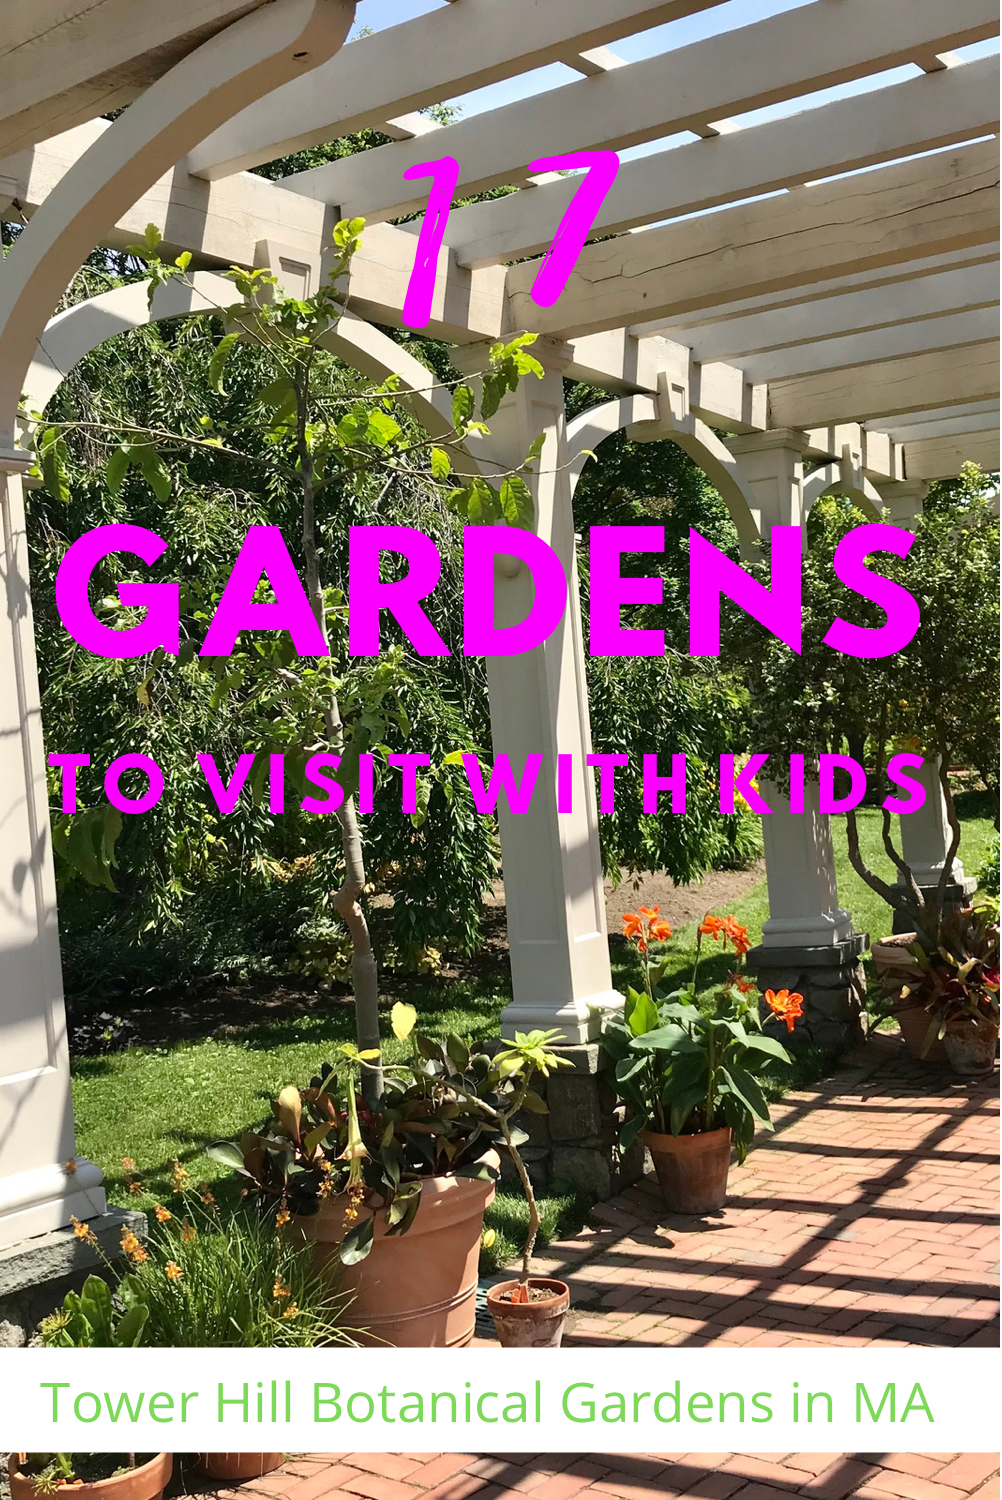 visit Tower Hills to see 17 beautiful gardens with kids